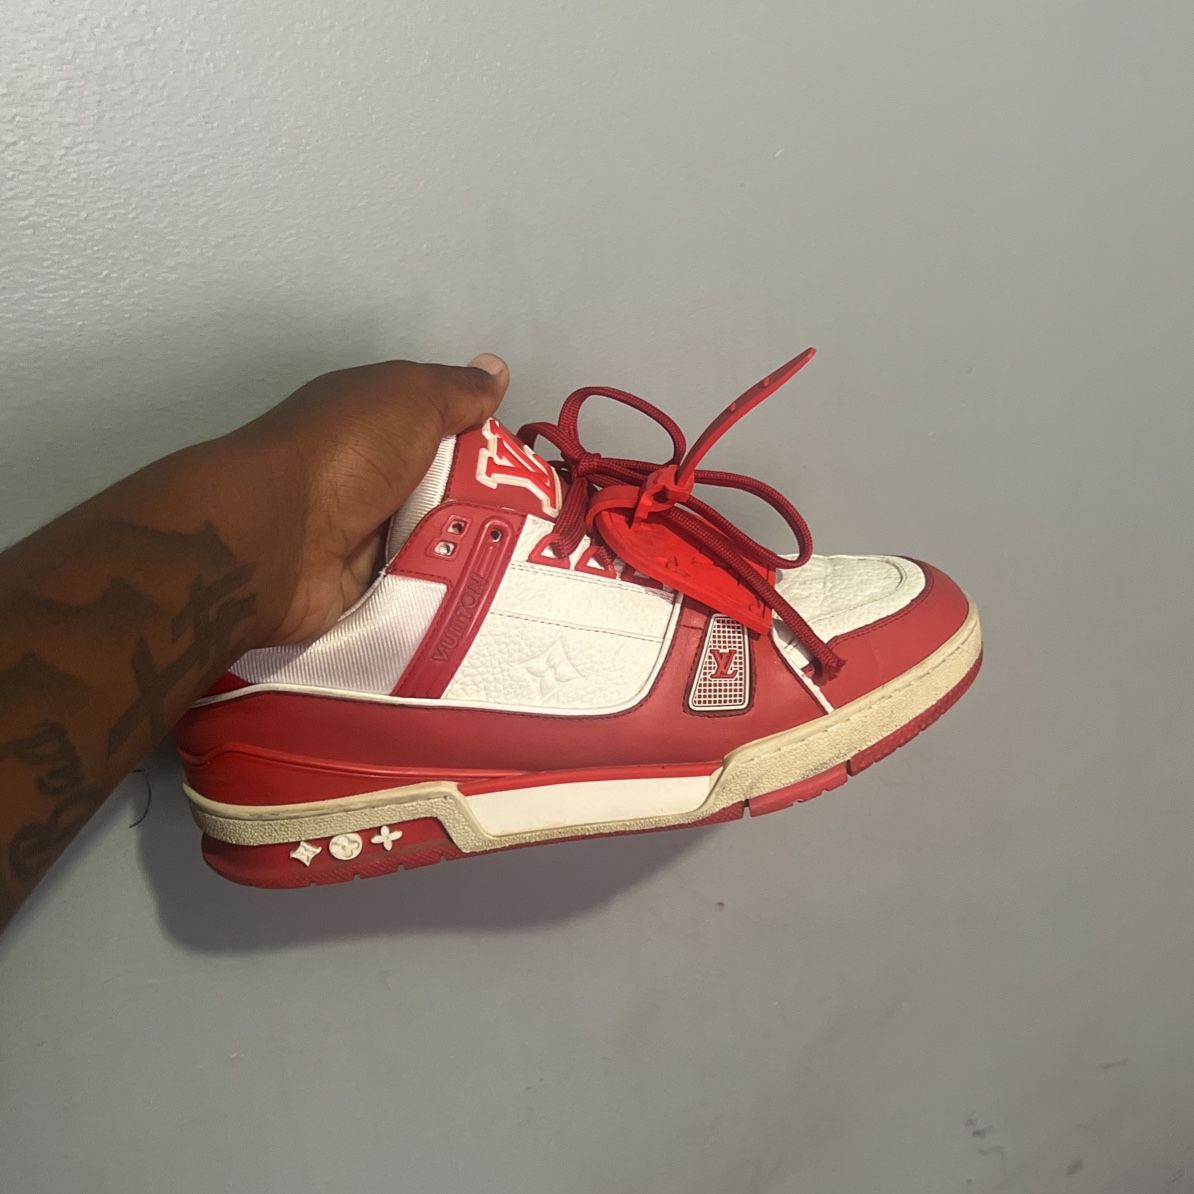 Louis Vuitton Denim Trainer for Sale in Cleveland, OH - OfferUp